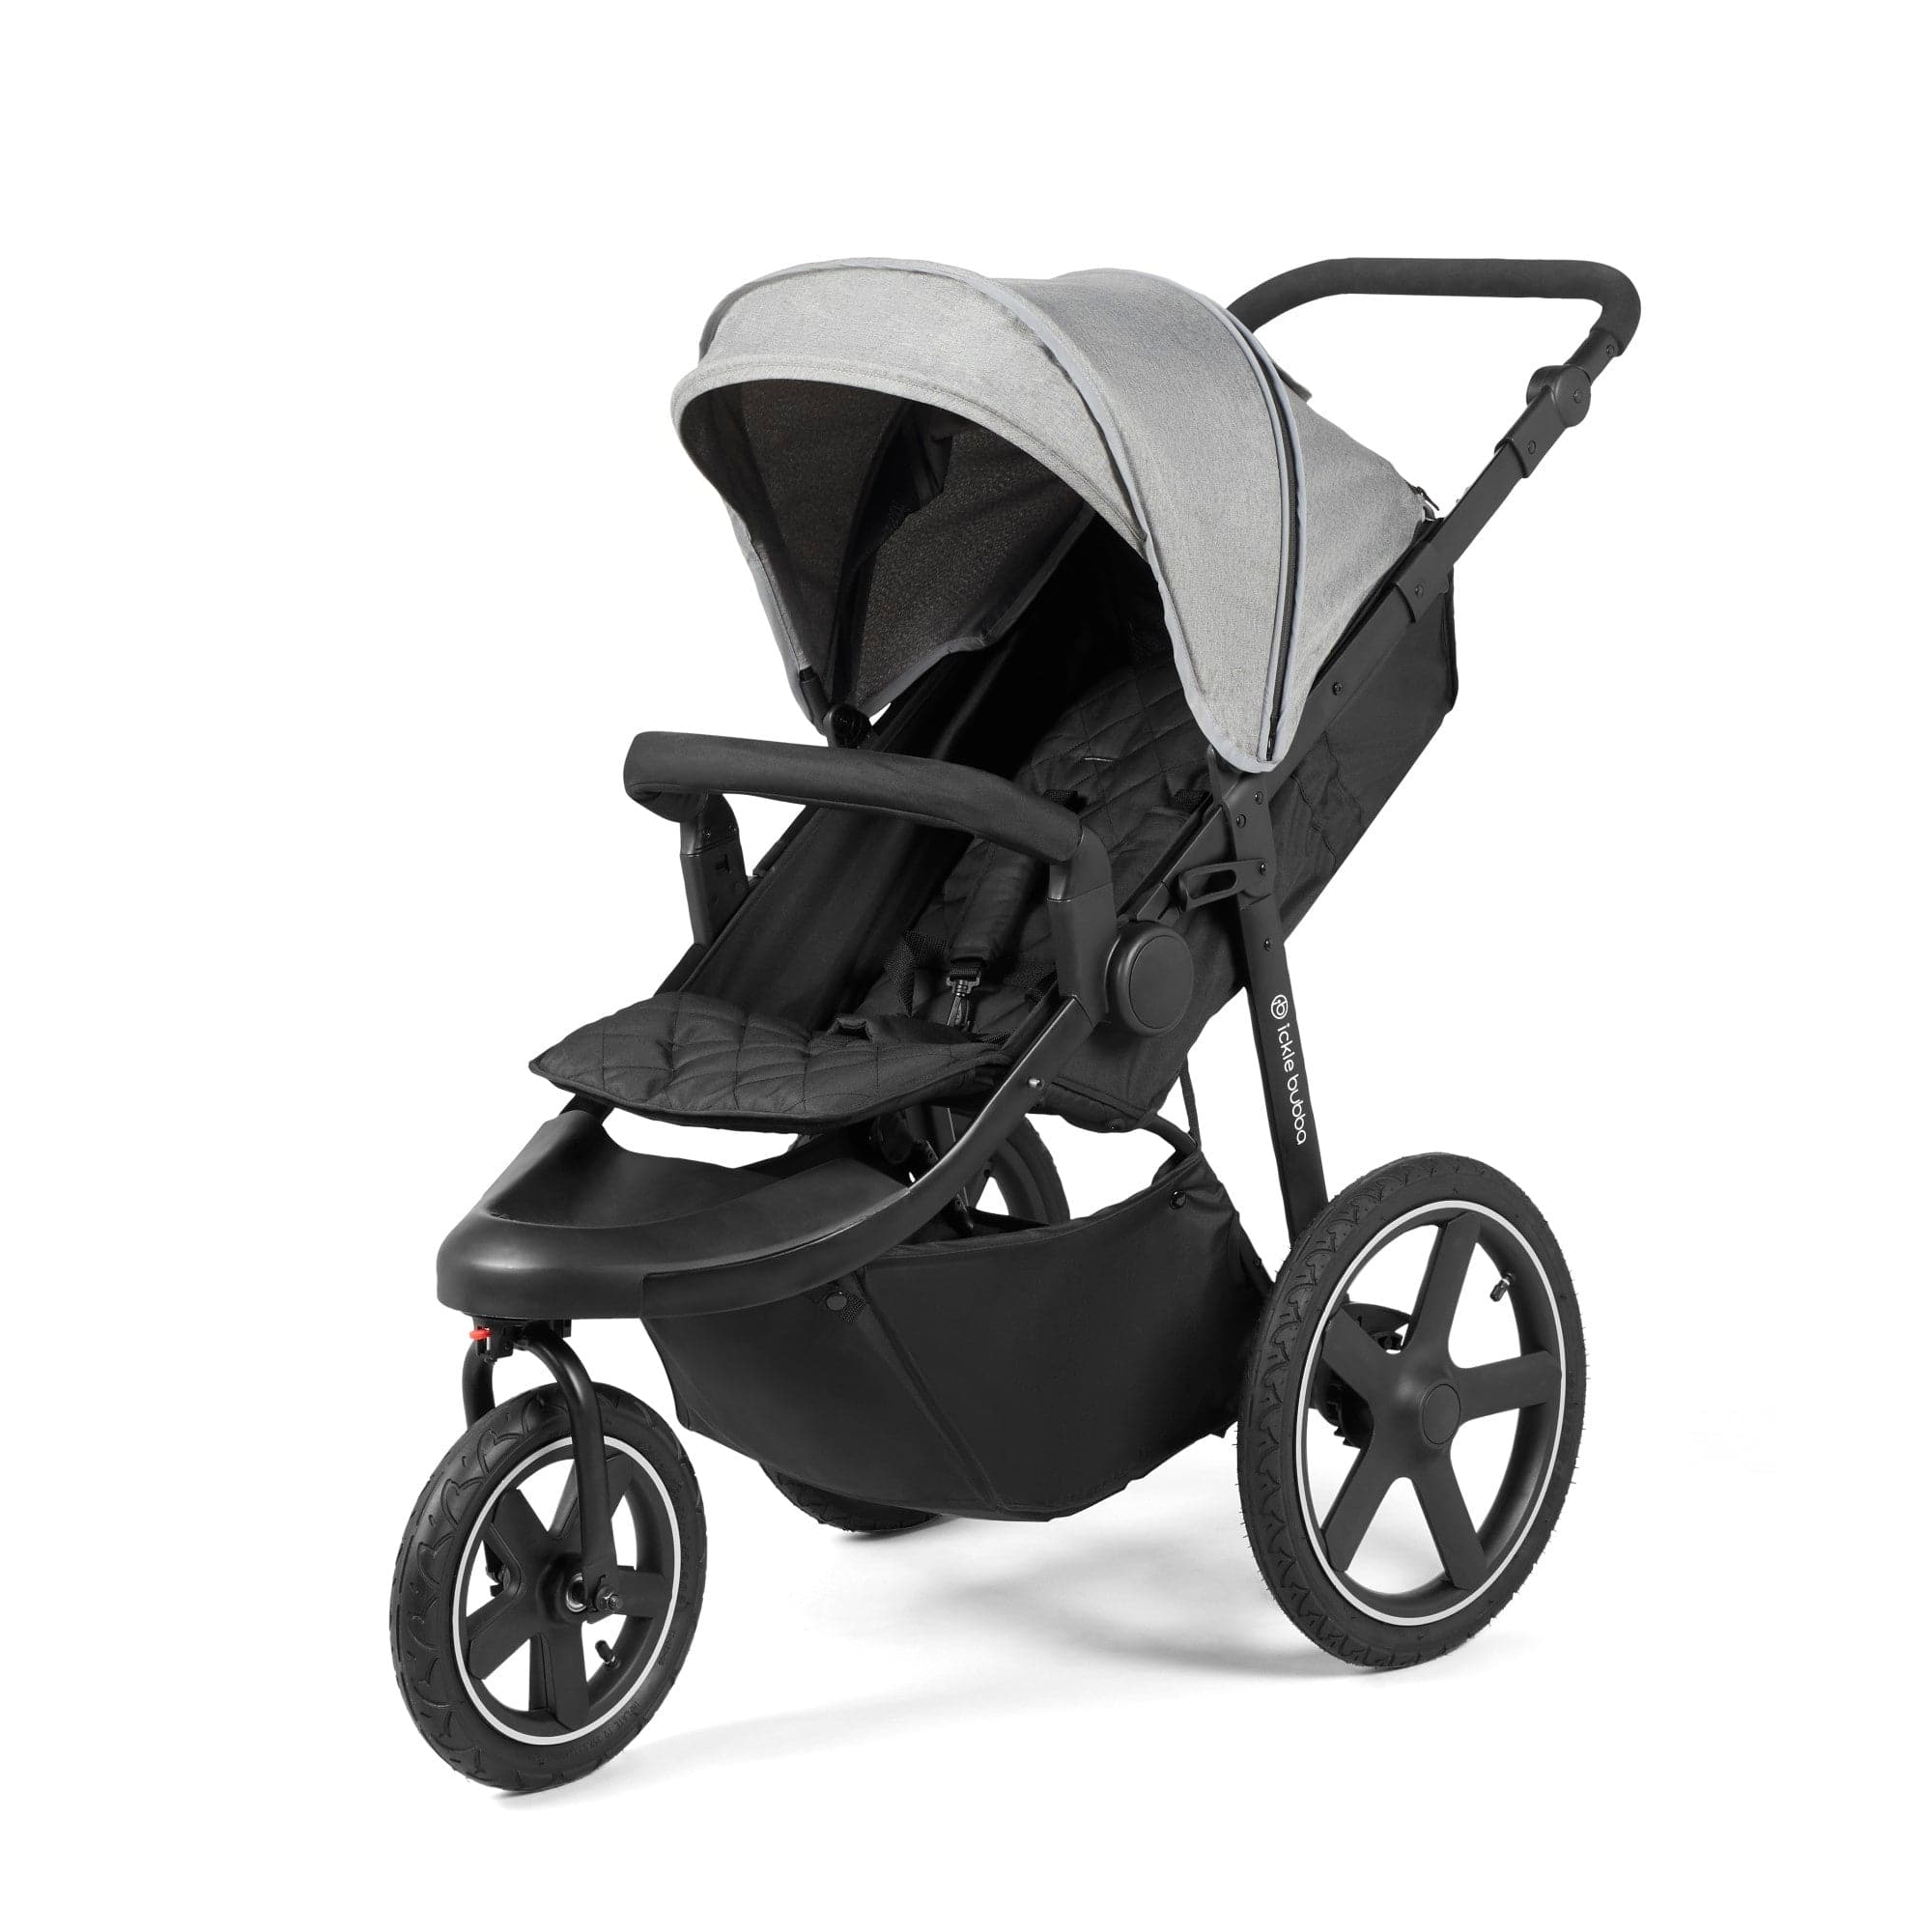 Ickle Bubba Venus Max Jogger Stroller I-Size Travel System in Black/Space Grey with Isofix Base 3 Wheelers 13-004-500-014 5060777950422